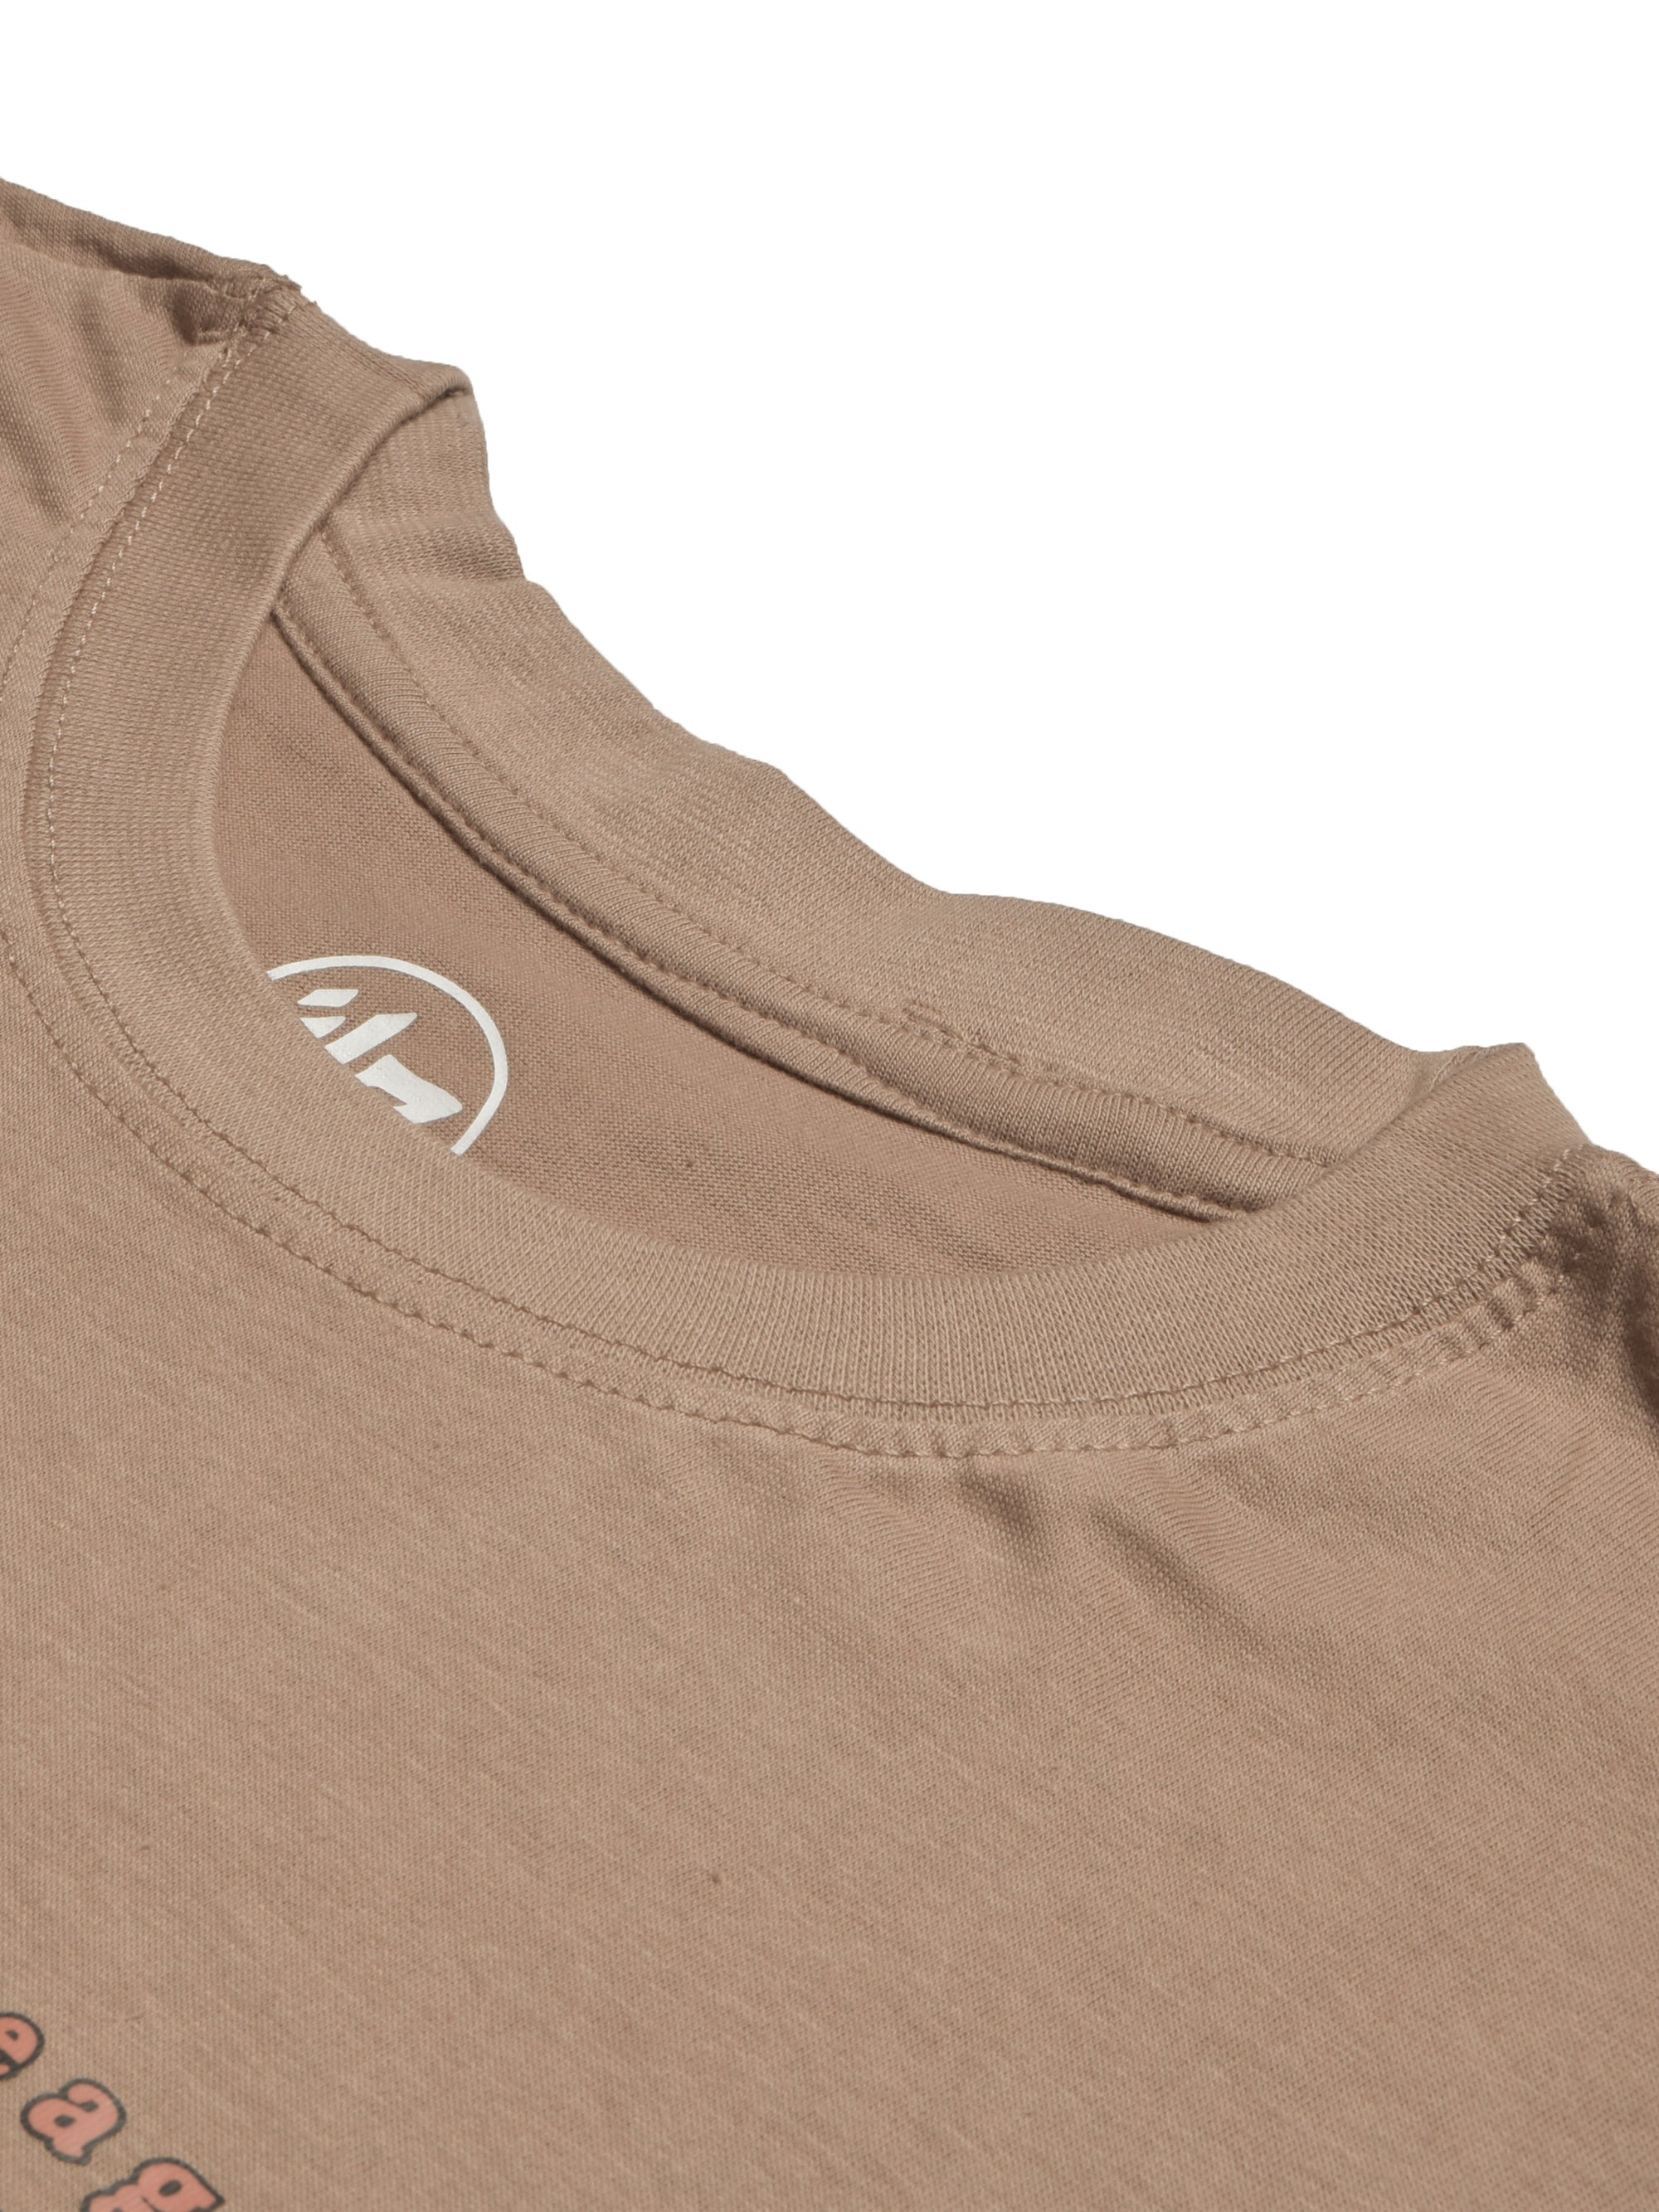 47 Single Jersey Crew Neck Tee Shirt For Men-Light Brown with Print-BE907/BR13169